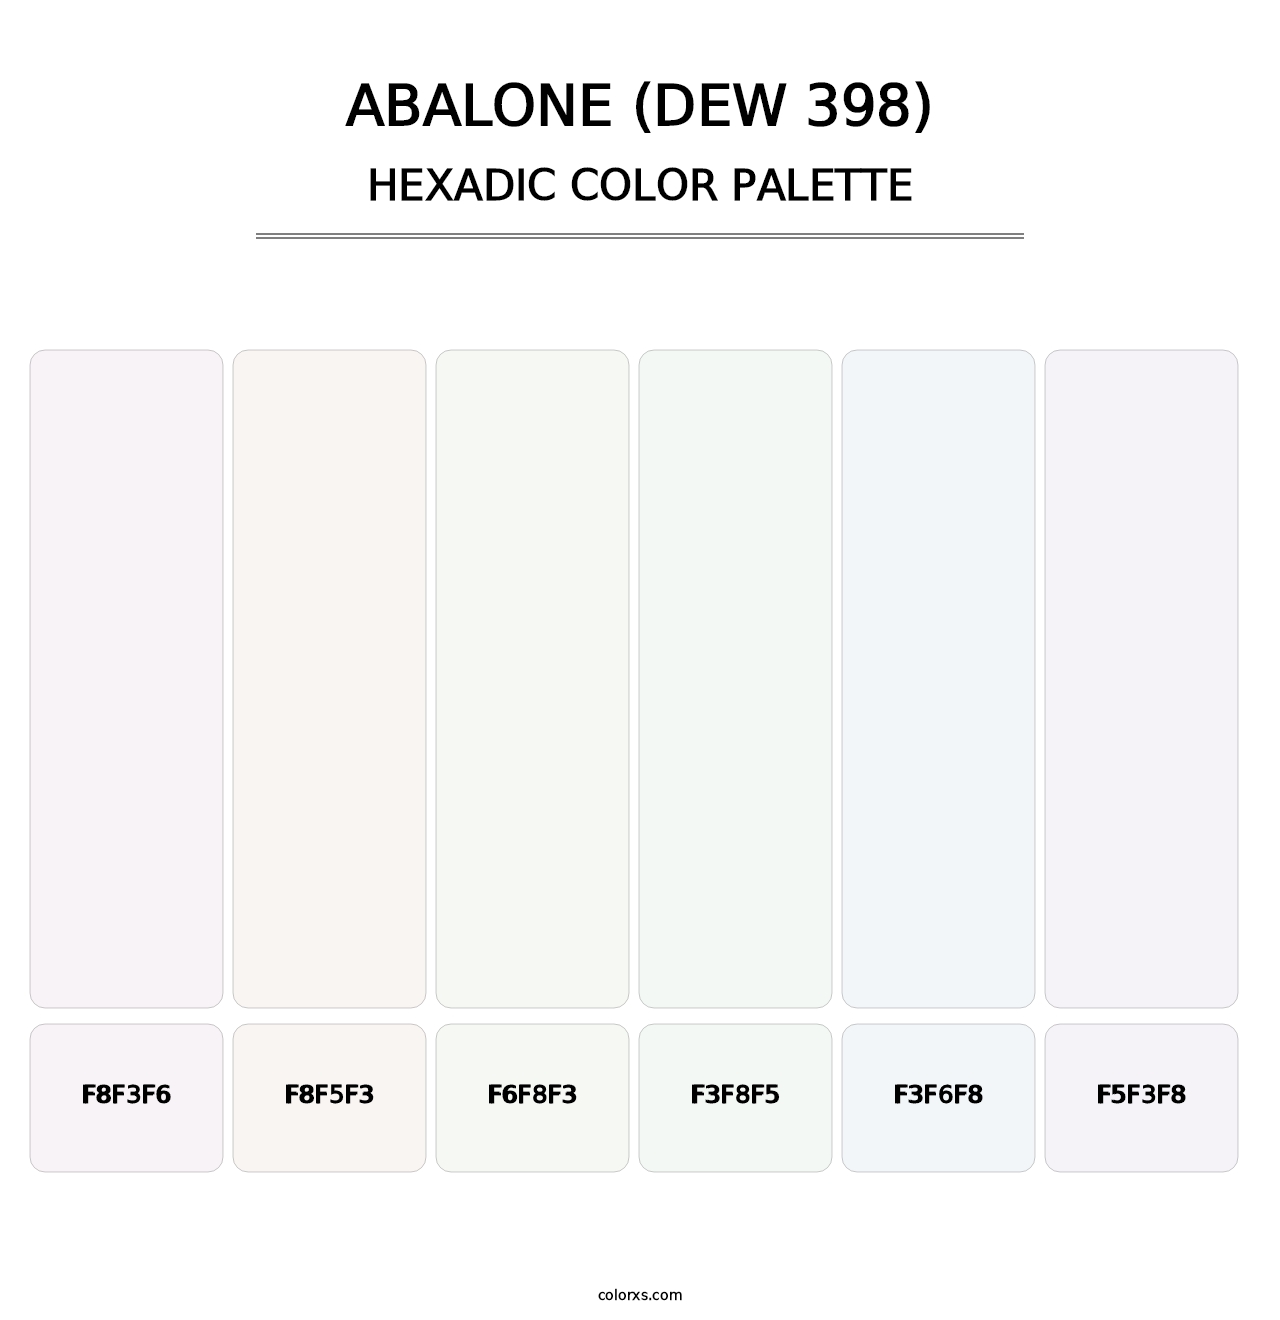 Abalone (DEW 398) - Hexadic Color Palette